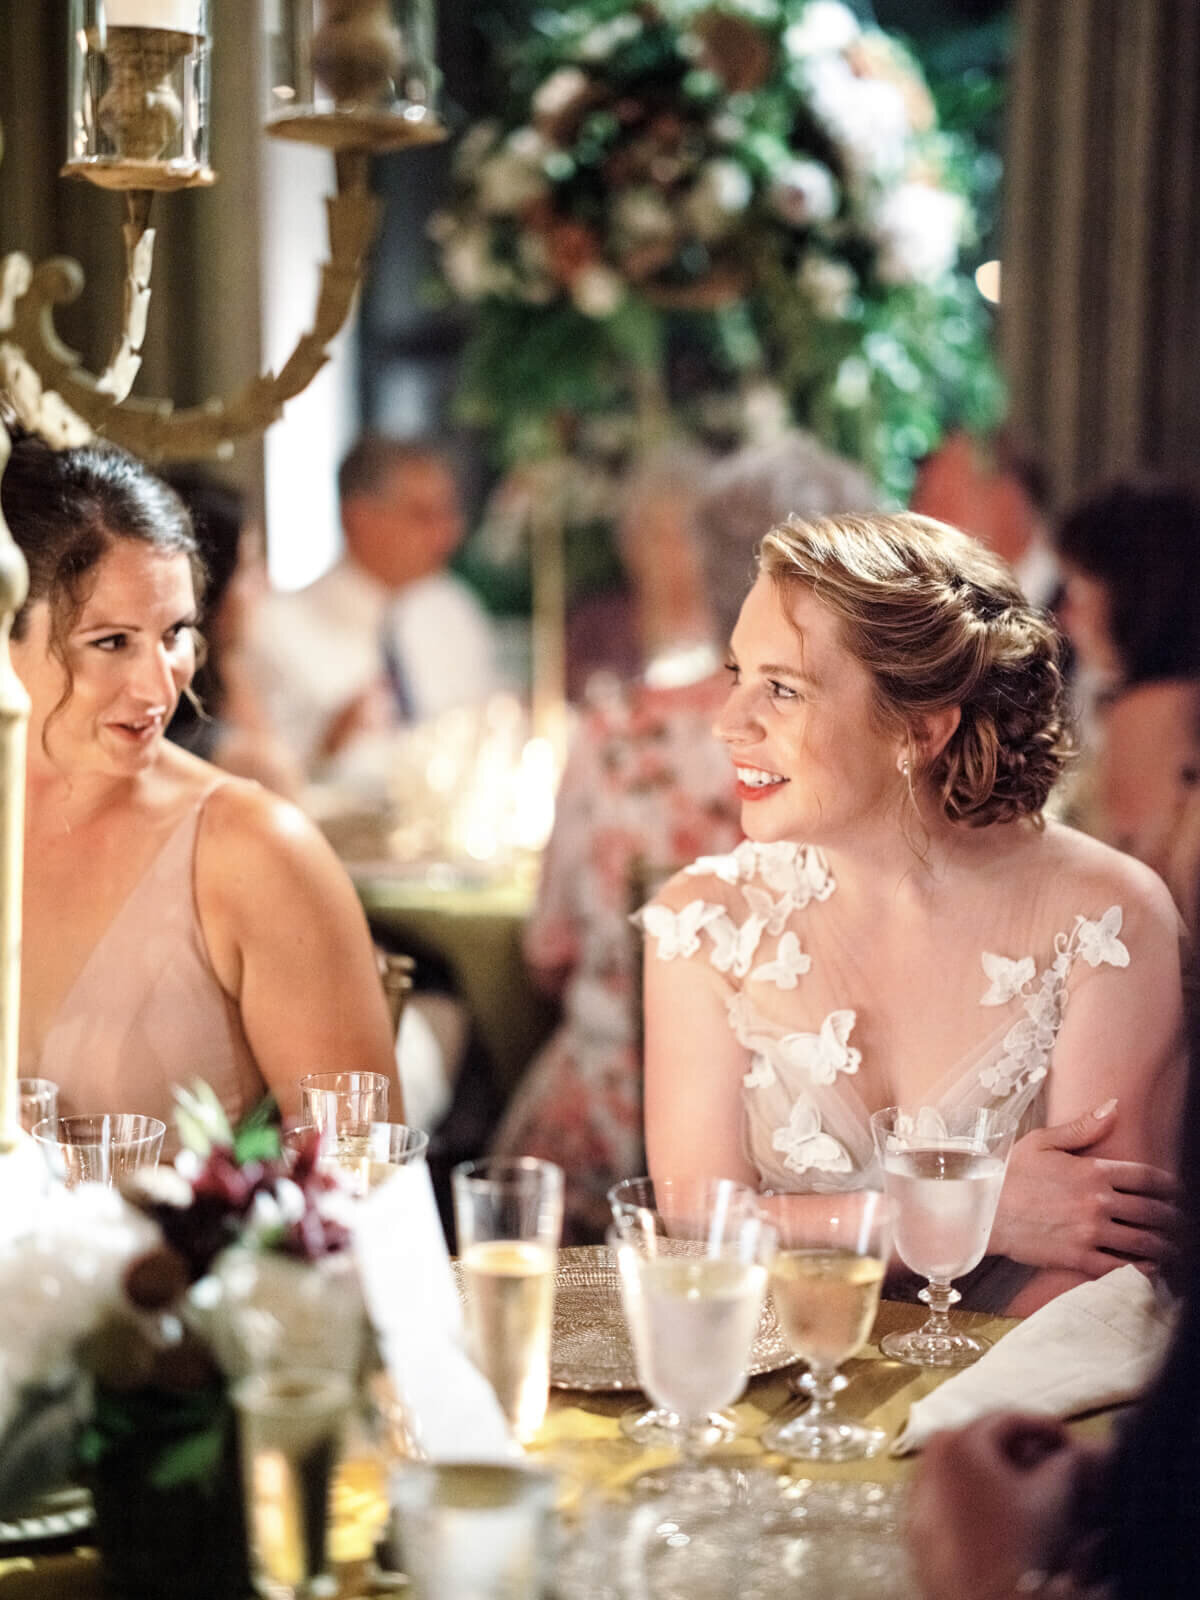 The bride is smiling, looking to the right, seated on a dinner table with a woman beside her; guests are in the background